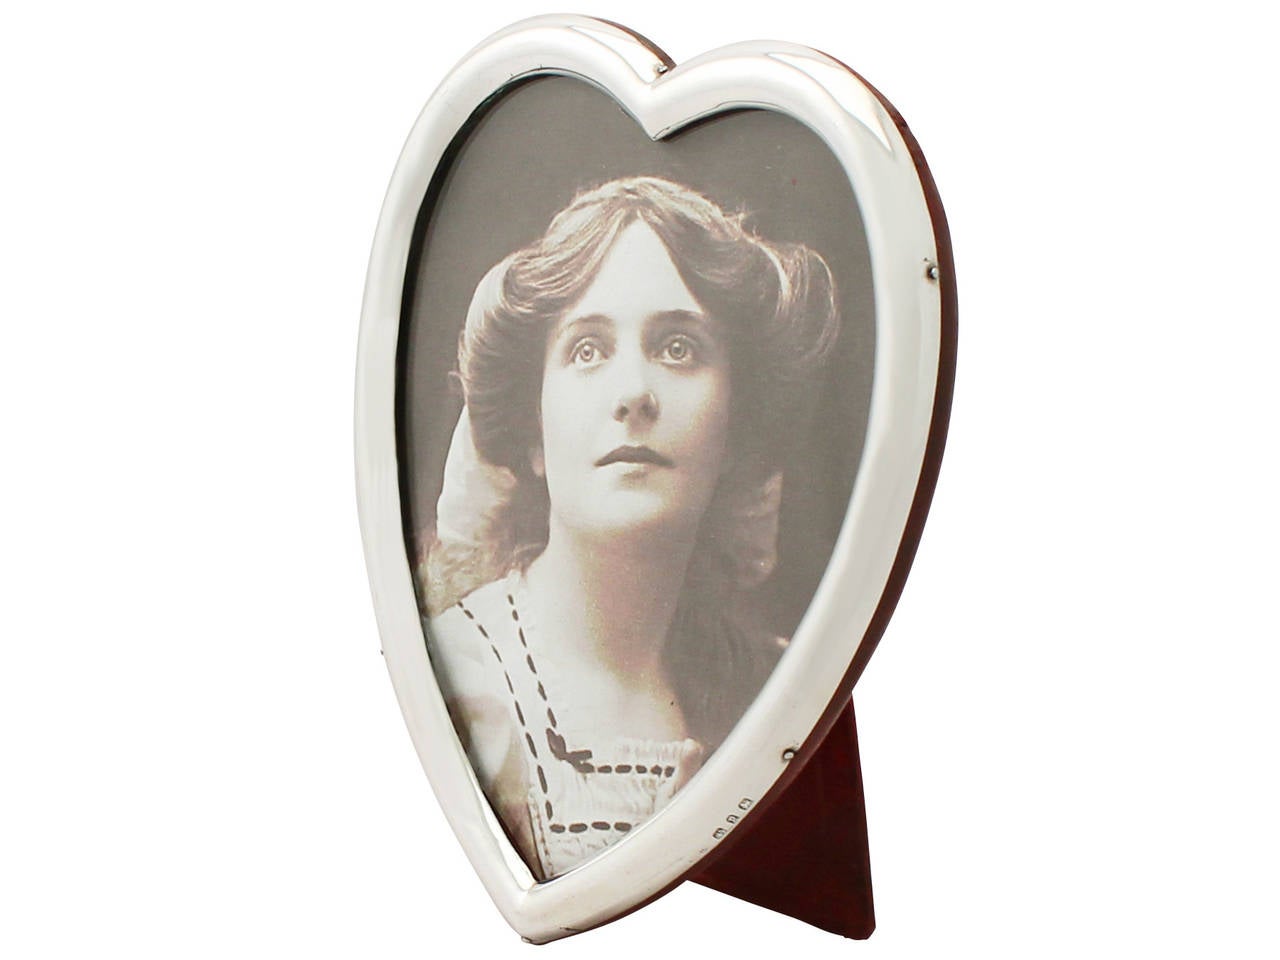 A fine and impressive antique Victorian English sterling silver heart shaped photograph frame; an addition to our ornamental silverware collection.

This fine antique Victorian sterling silver photo frame has a plain rounded heart shaped